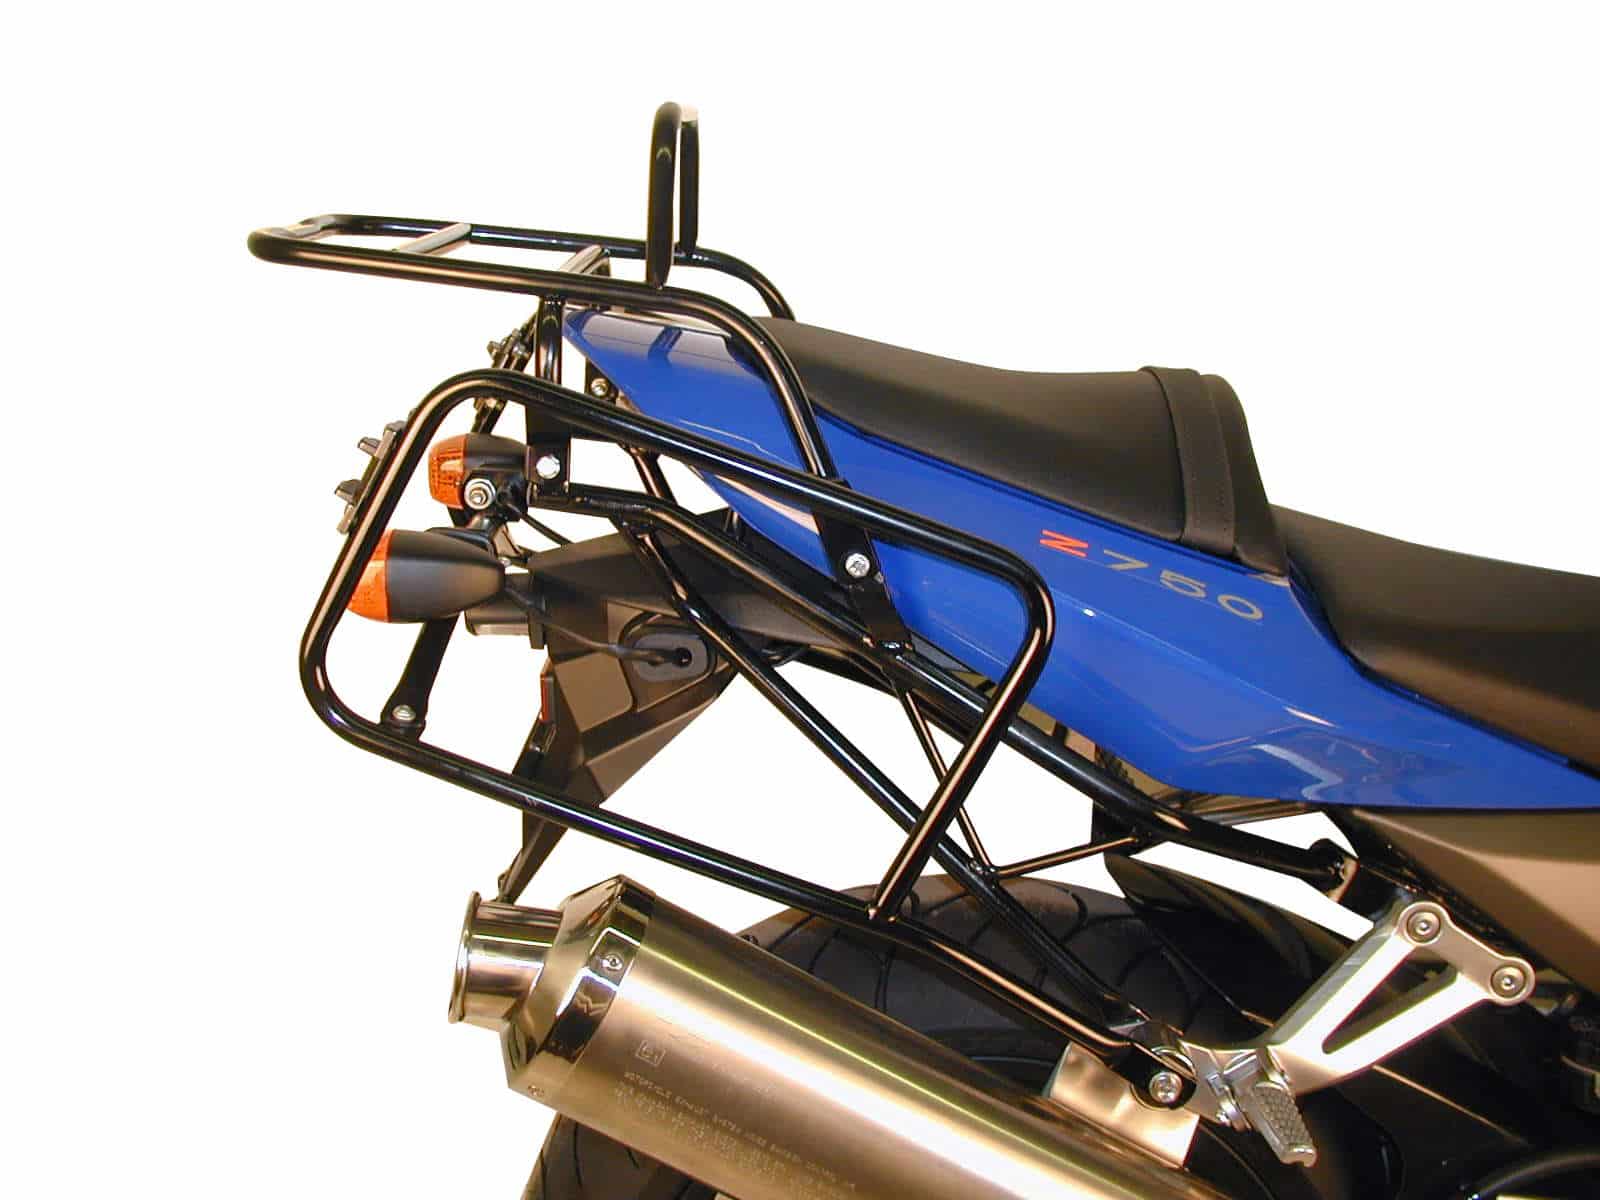 Sidecarrier permanent mounted black for Kawasaki Z 750 (2004-2006)